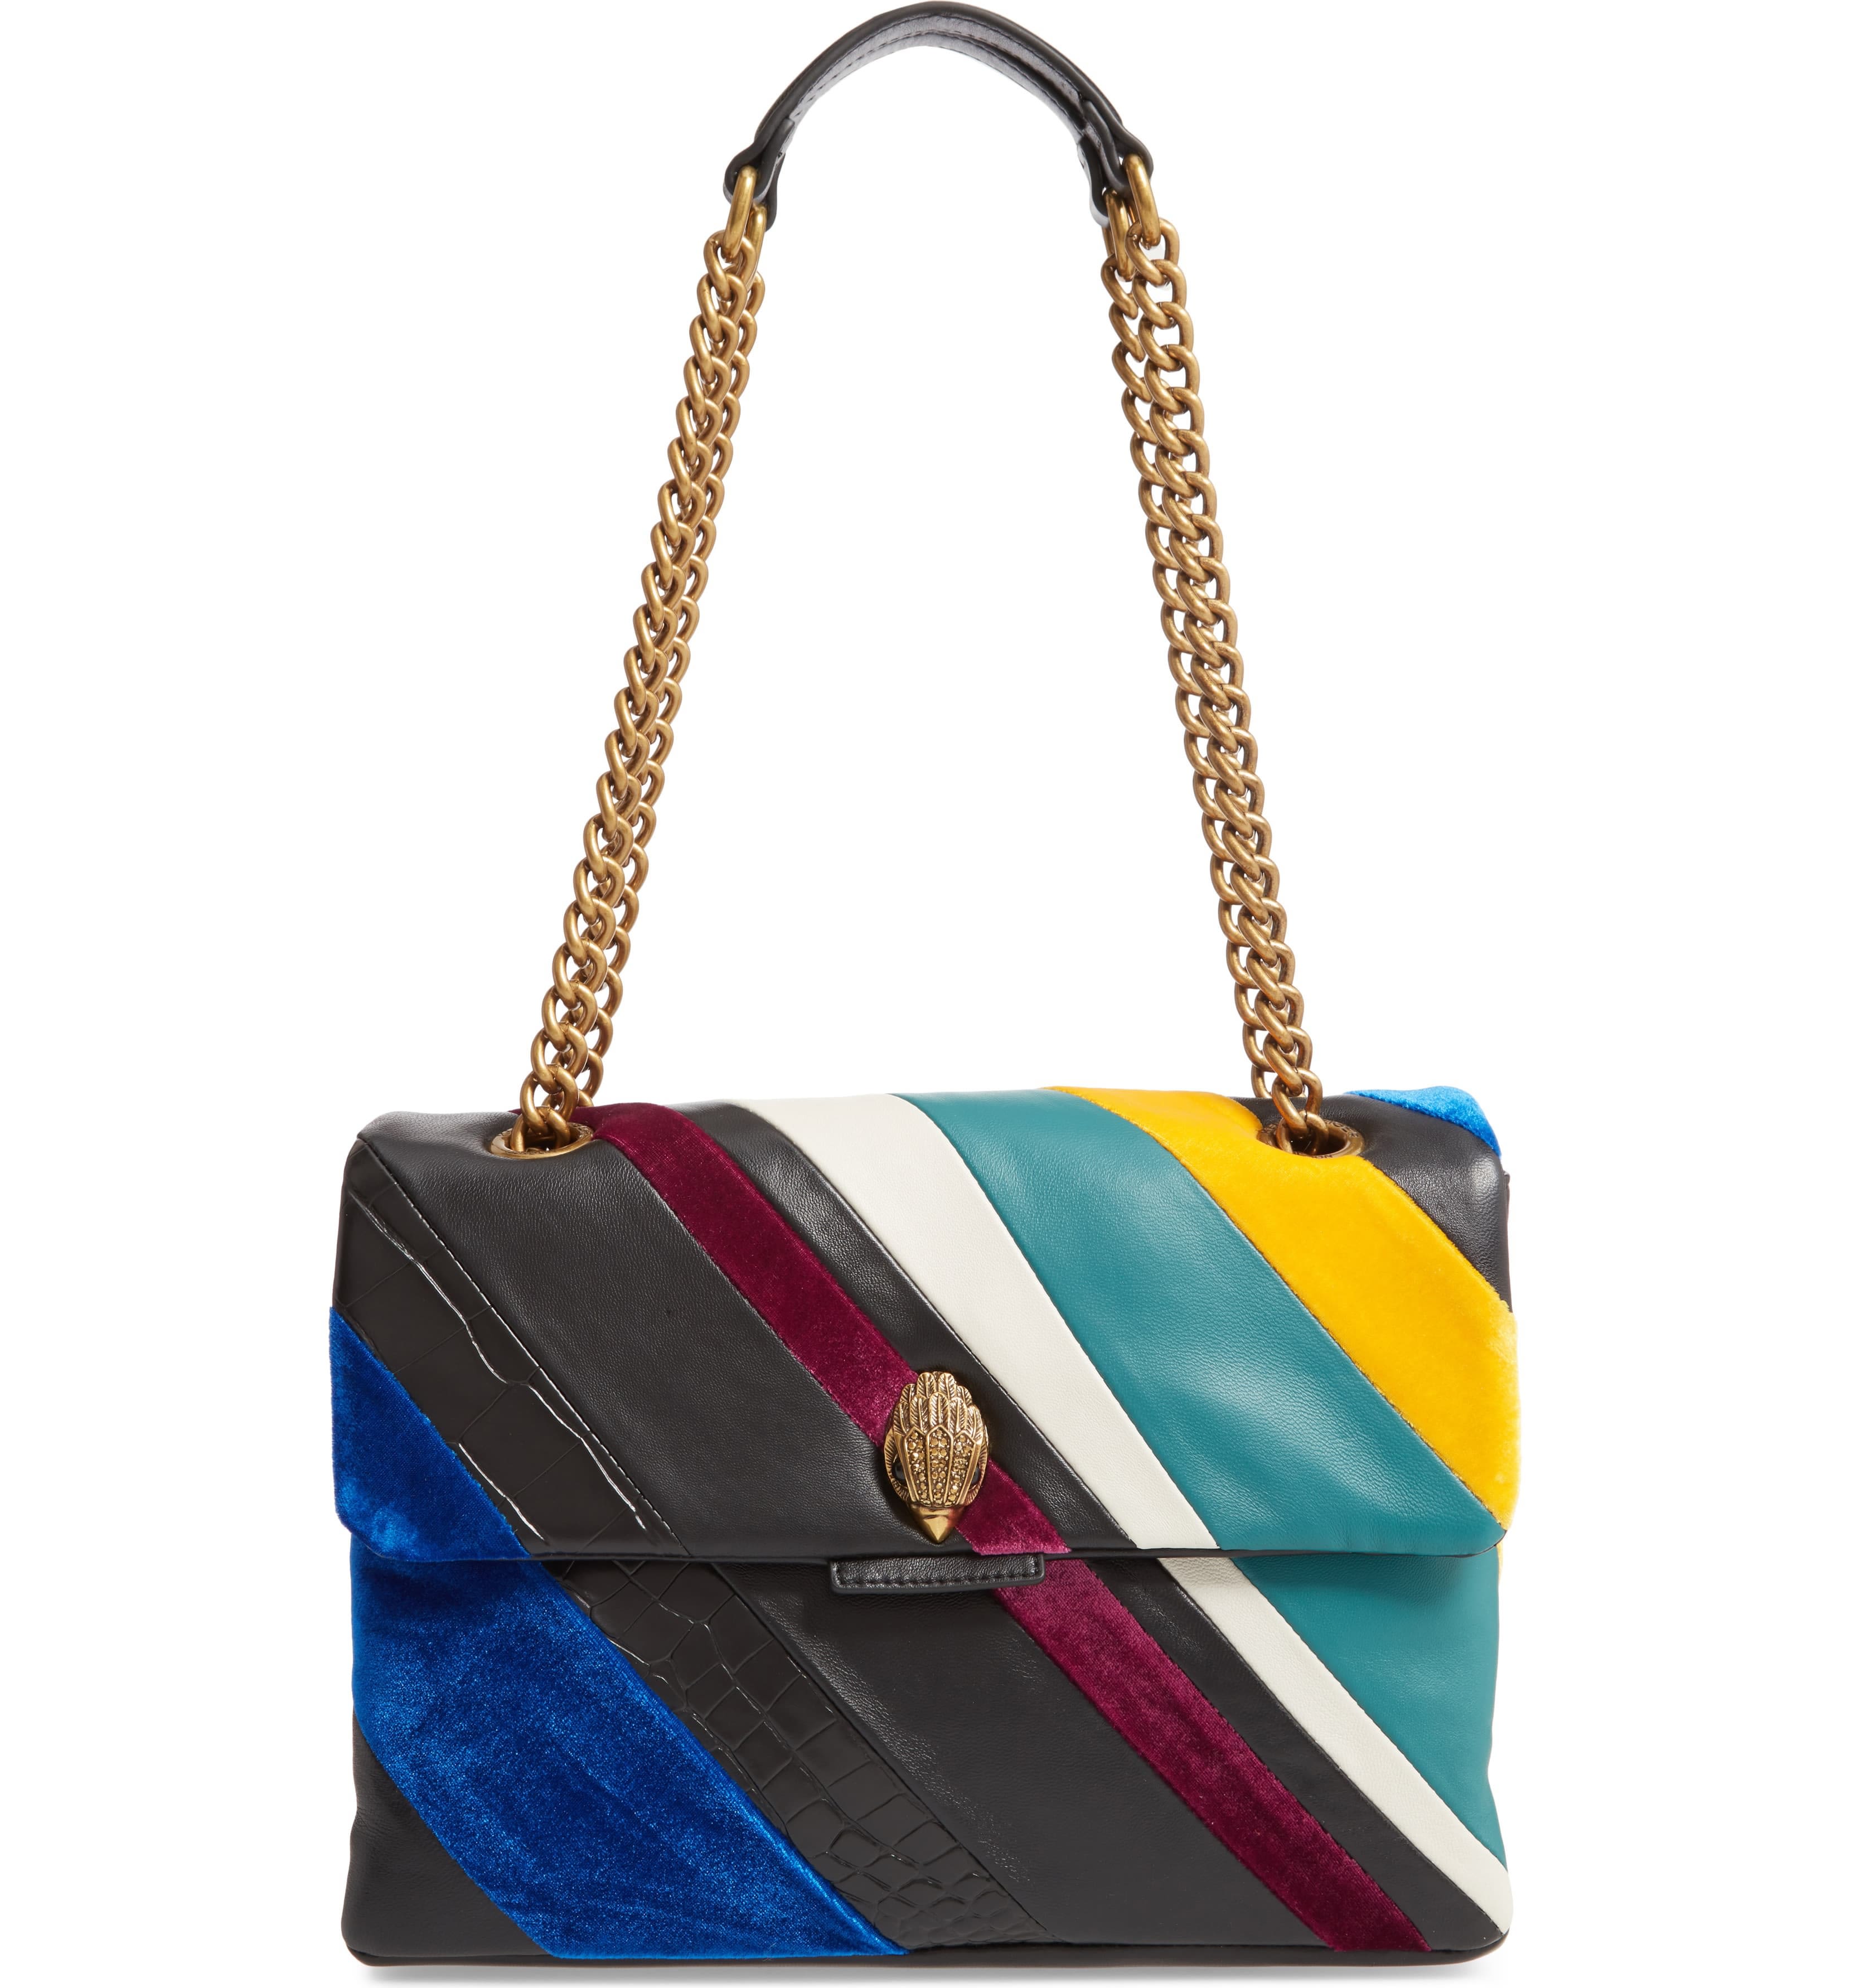 Bye, Black: You Need These Colorful Handbags for Fall | Houstonia Magazine